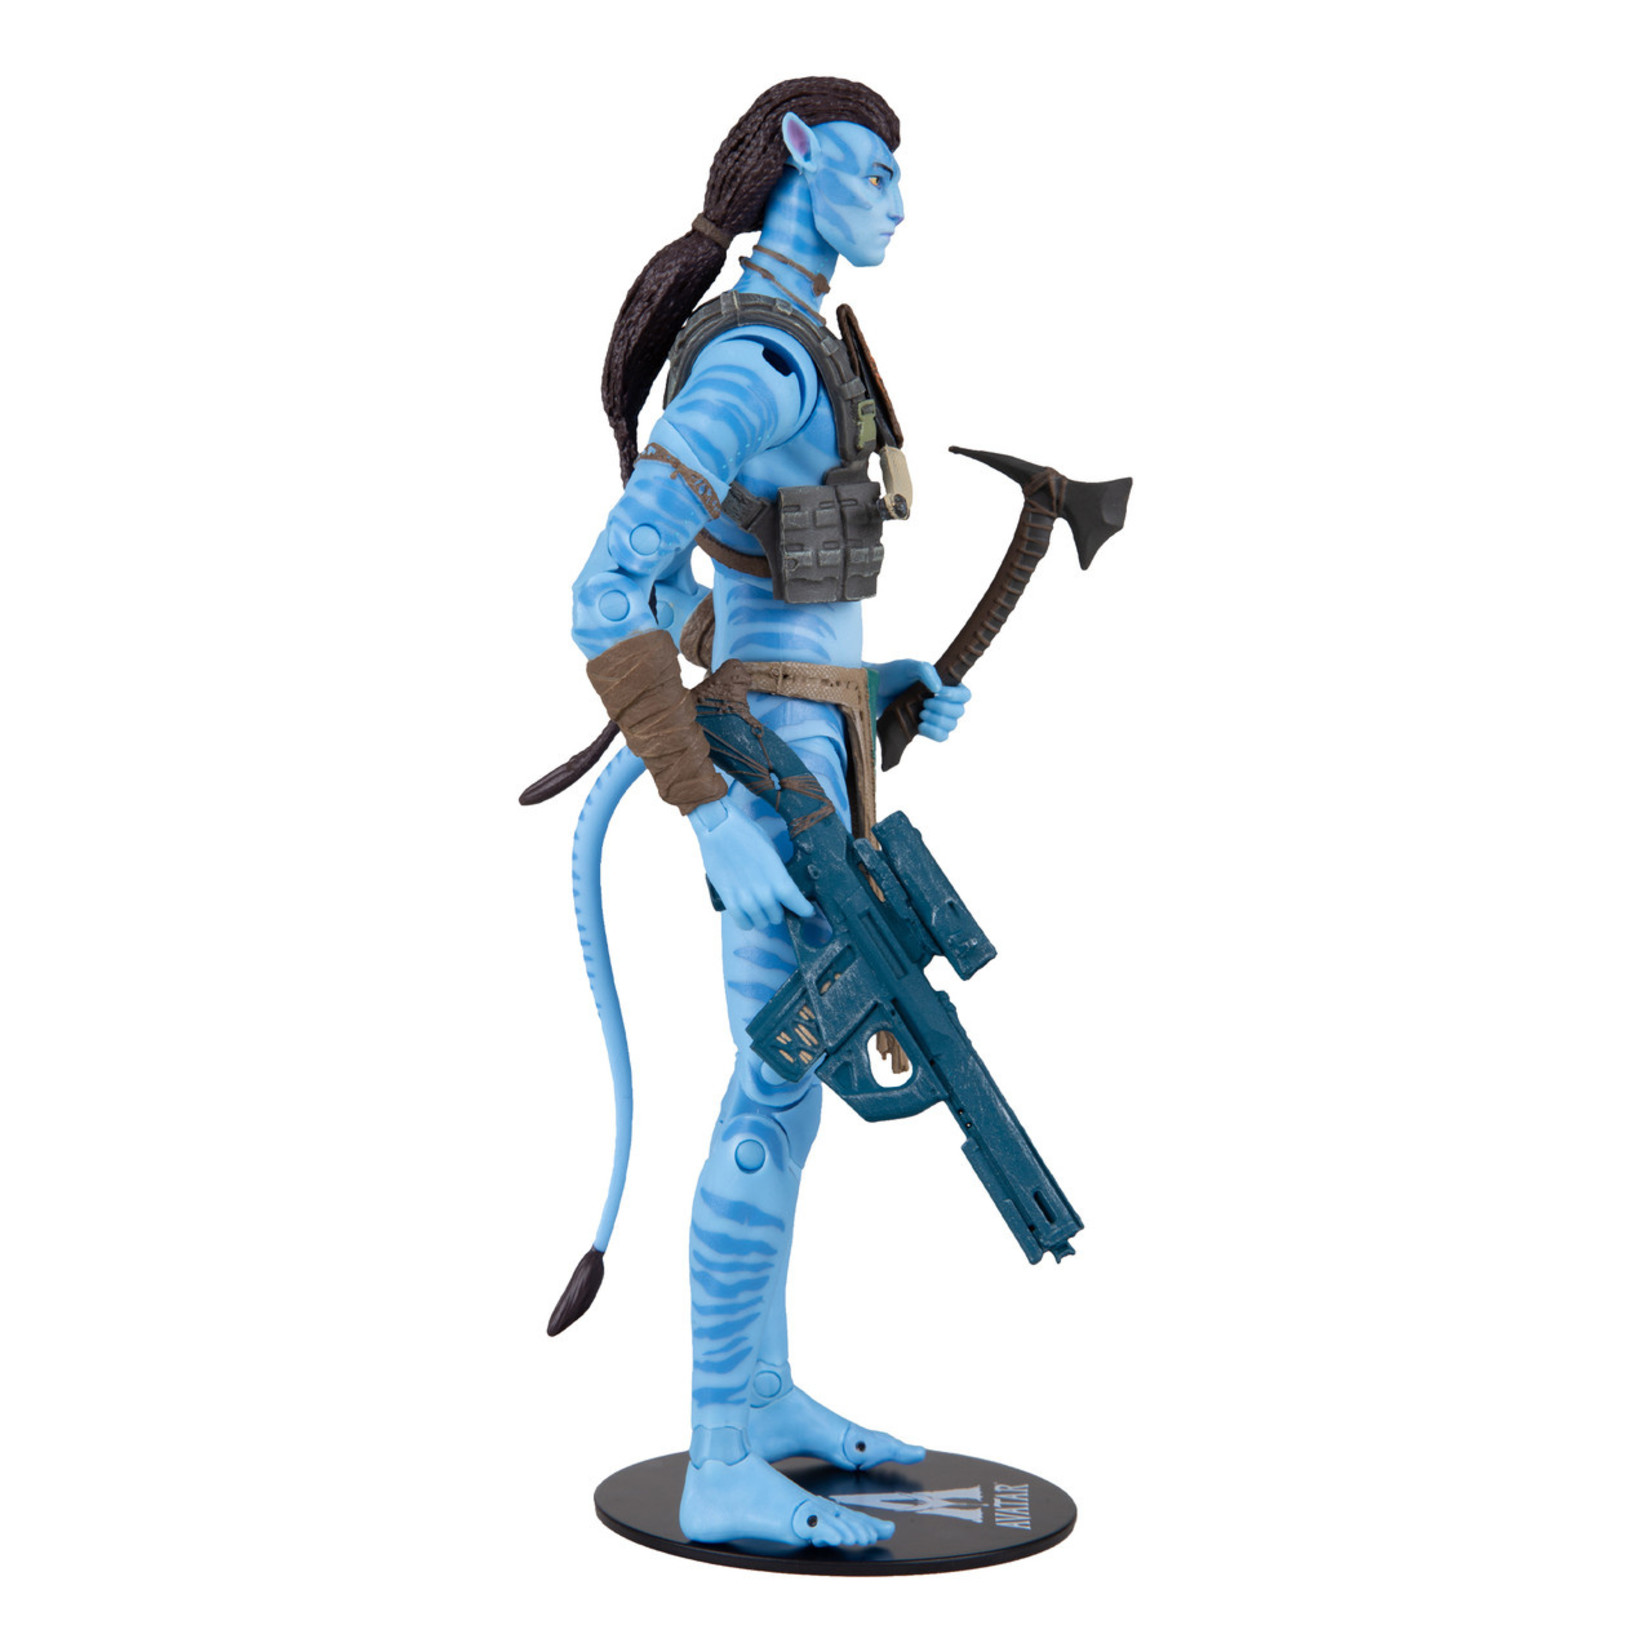 McFarlane Toys McFarlane Toys Avatar The Way Of Water Jake Sully in Reef Battle 7" Figure